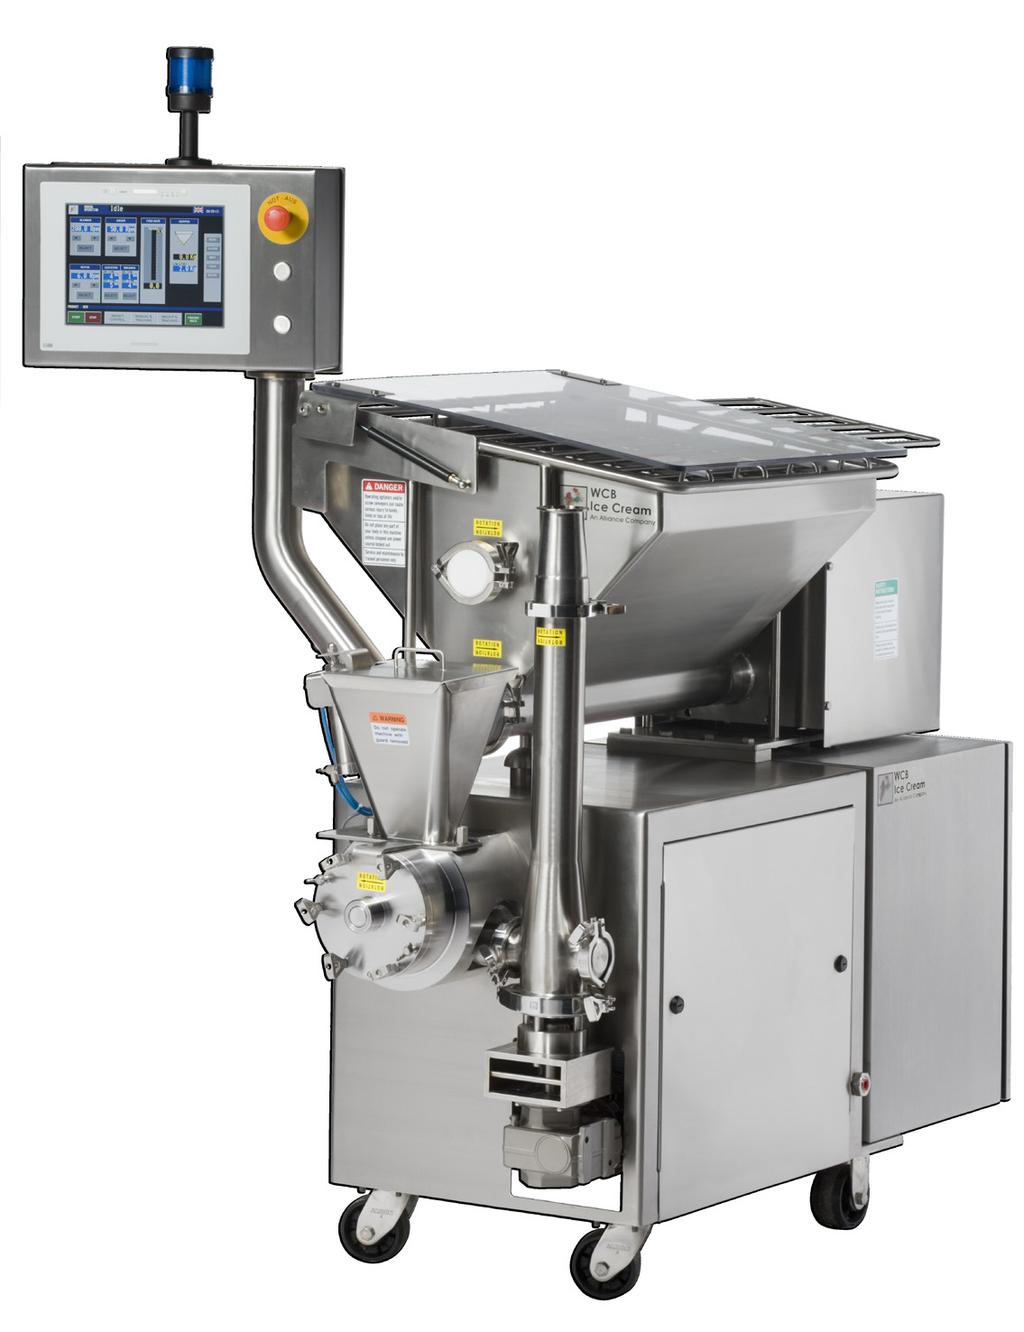 IF 410 Flexibility and efficiency are the keywords Highly efficient, flexible and reliable - for a large variety of ice cream products.